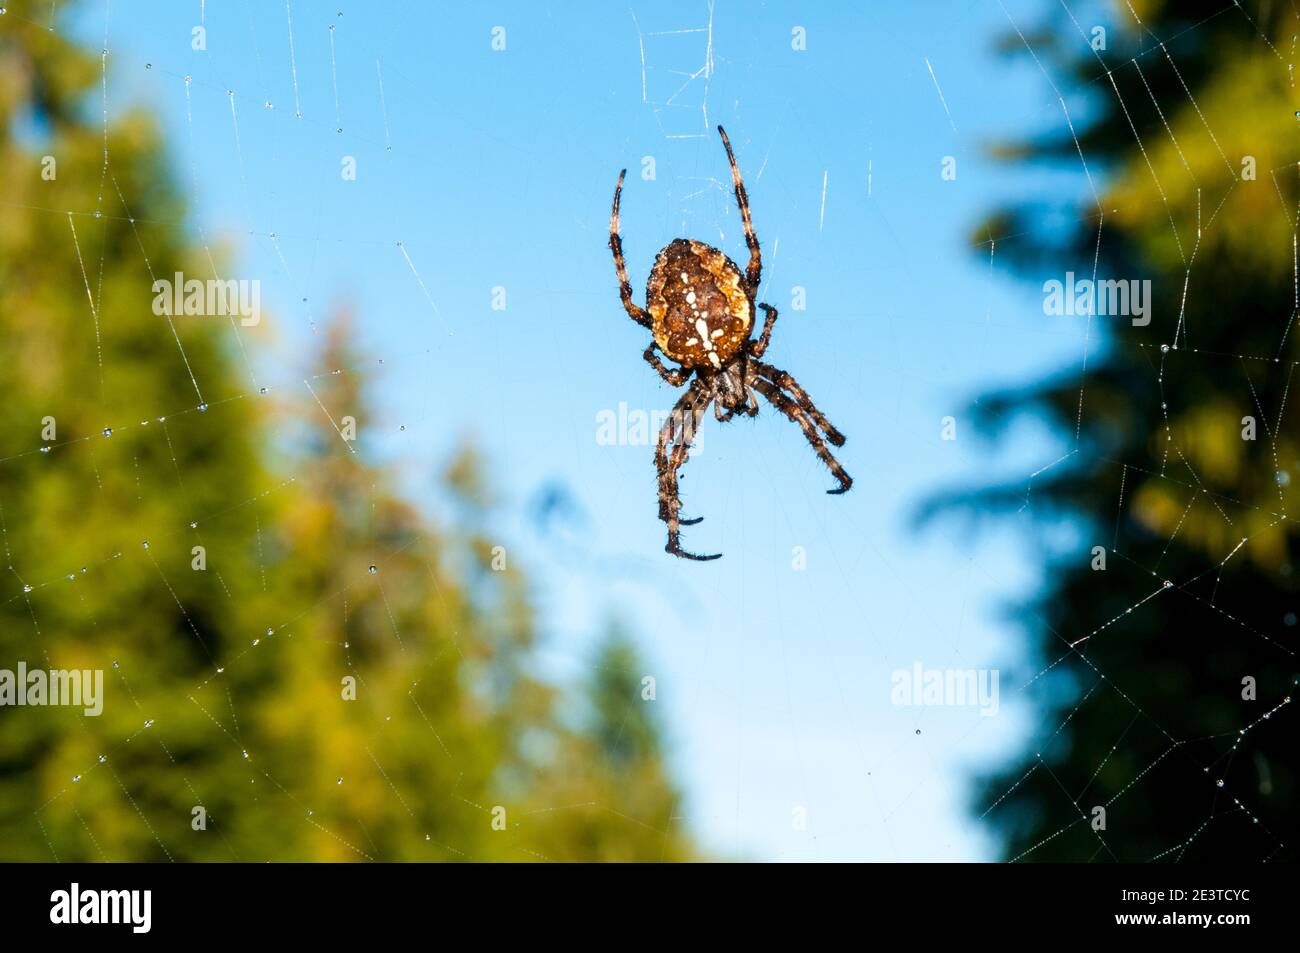 An adult garden spider (Araneus diadematus) suspended in its web in the Black Forest near Freudenstadt, Baden-Württemberg, Germany. September. Stock Photo